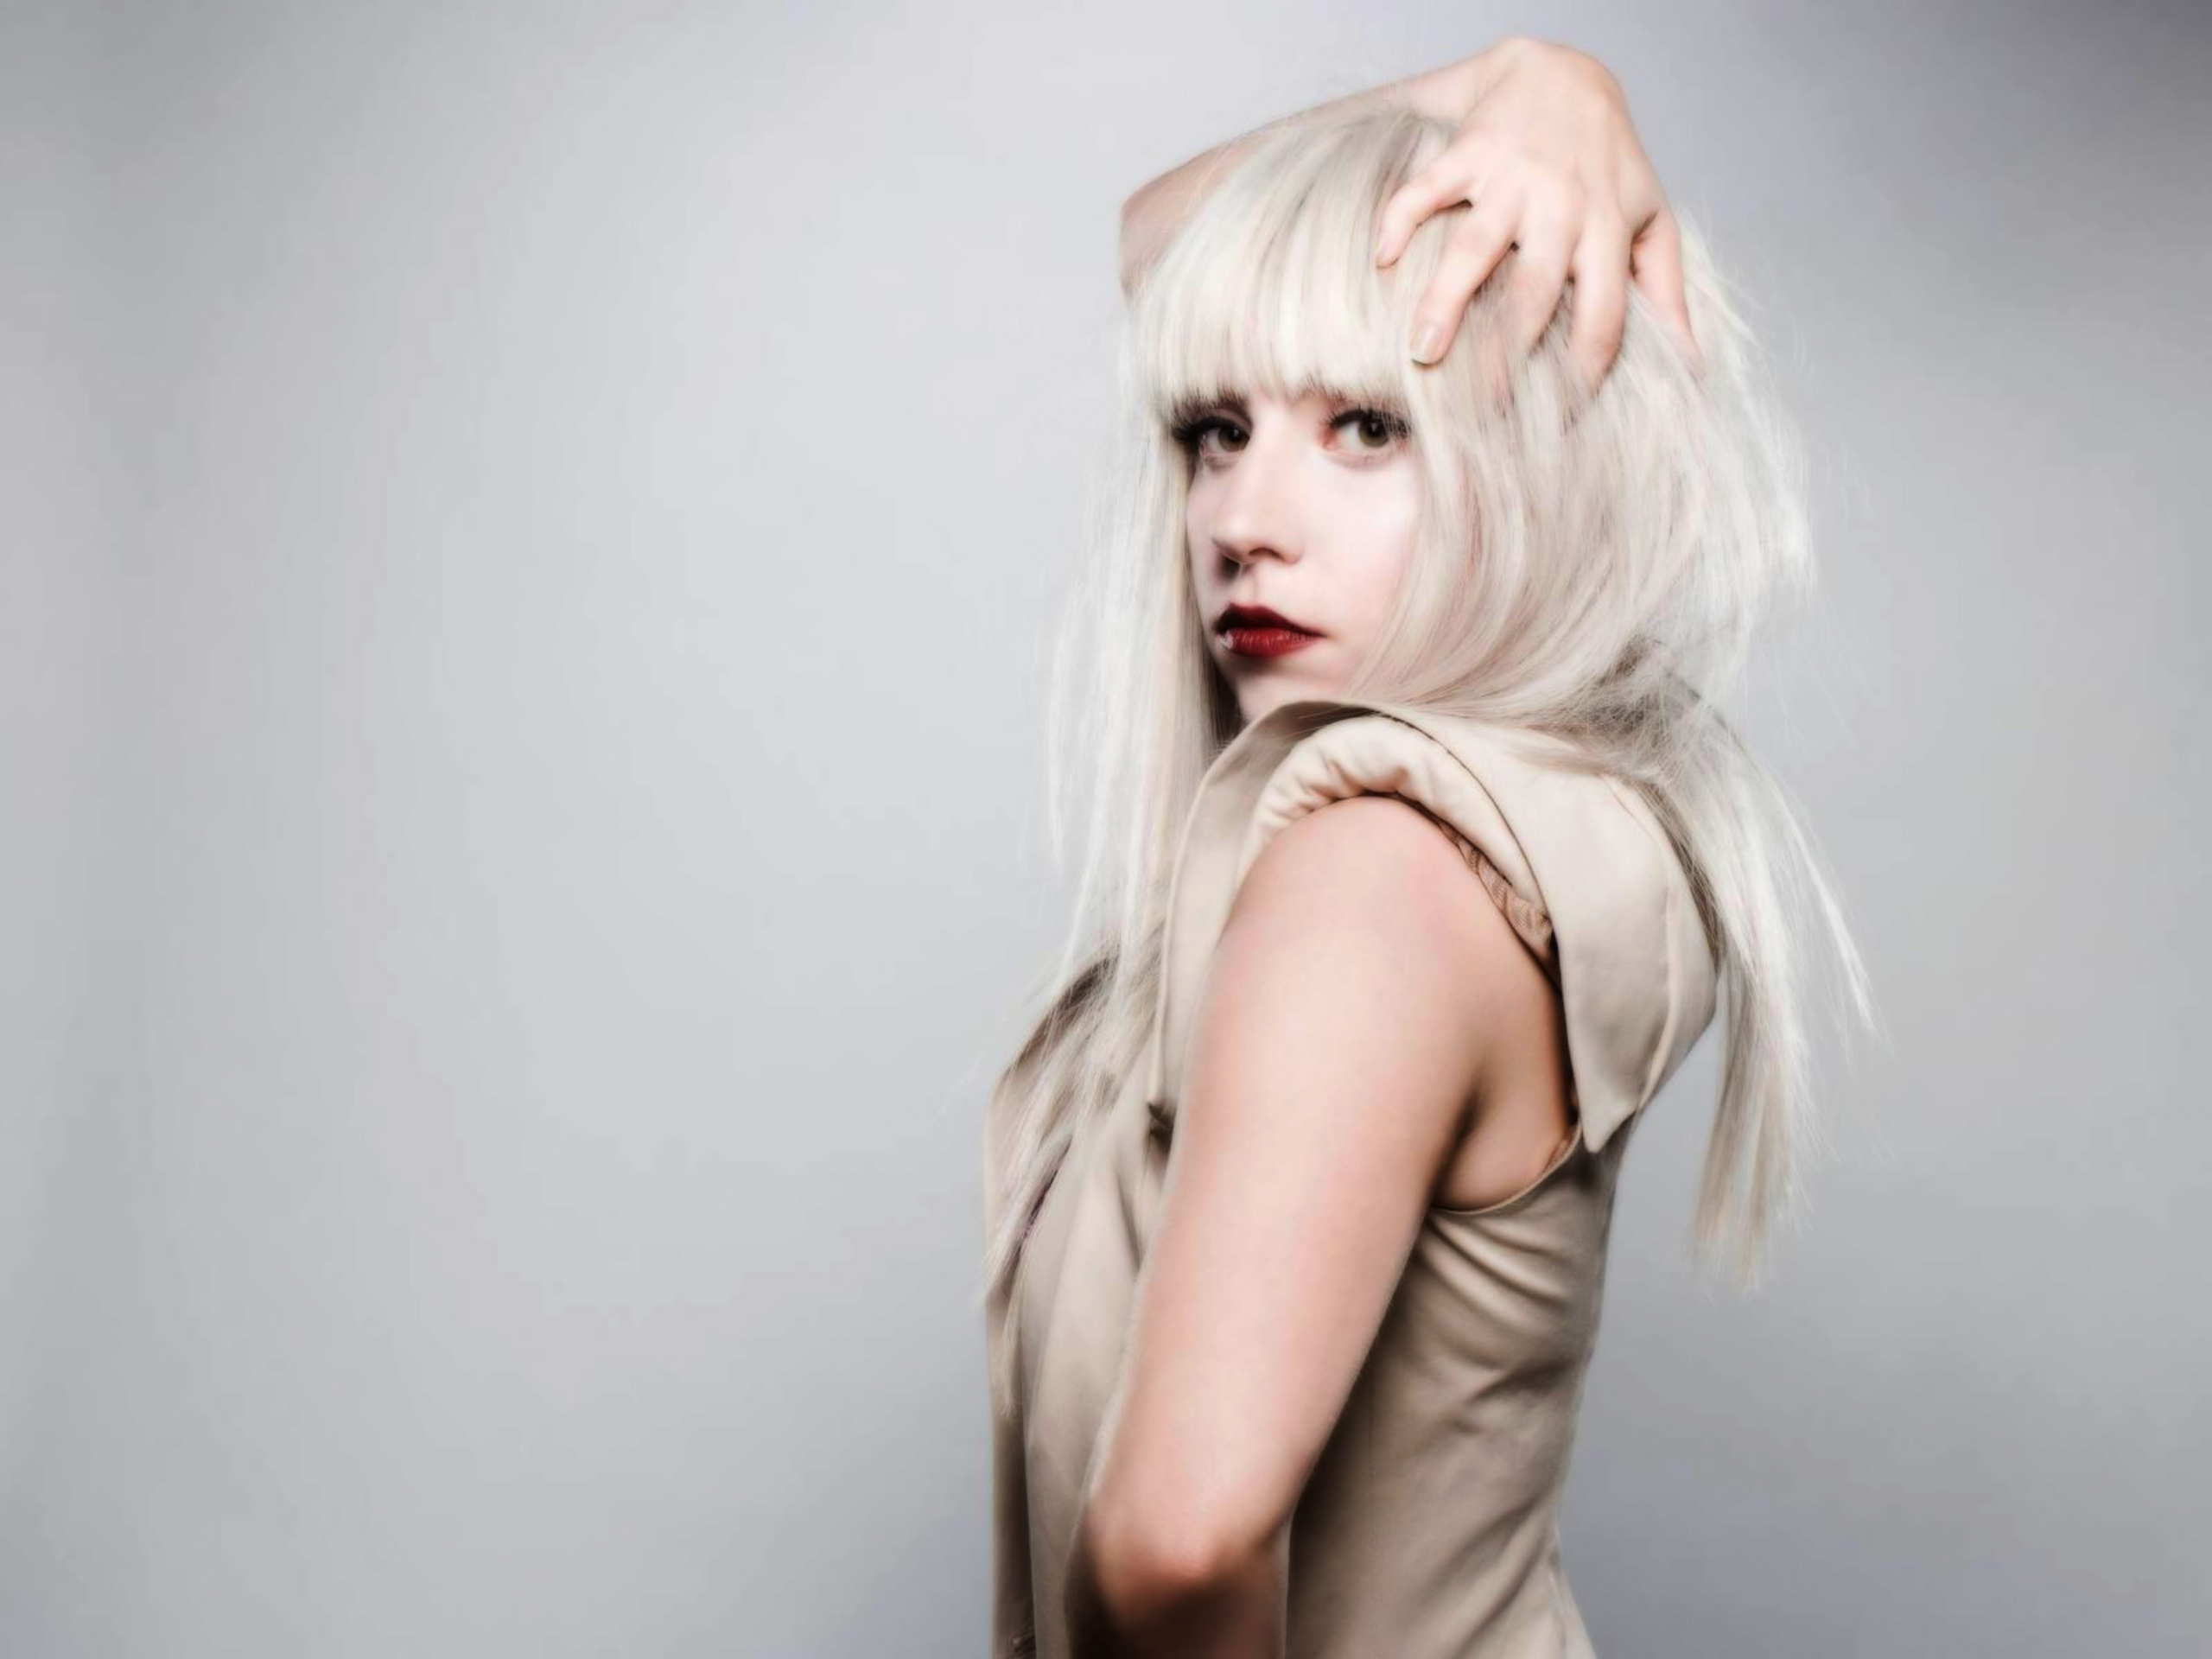 Lady GaGa Free Desktop Wallpapers for HD Widescreen and Mobile